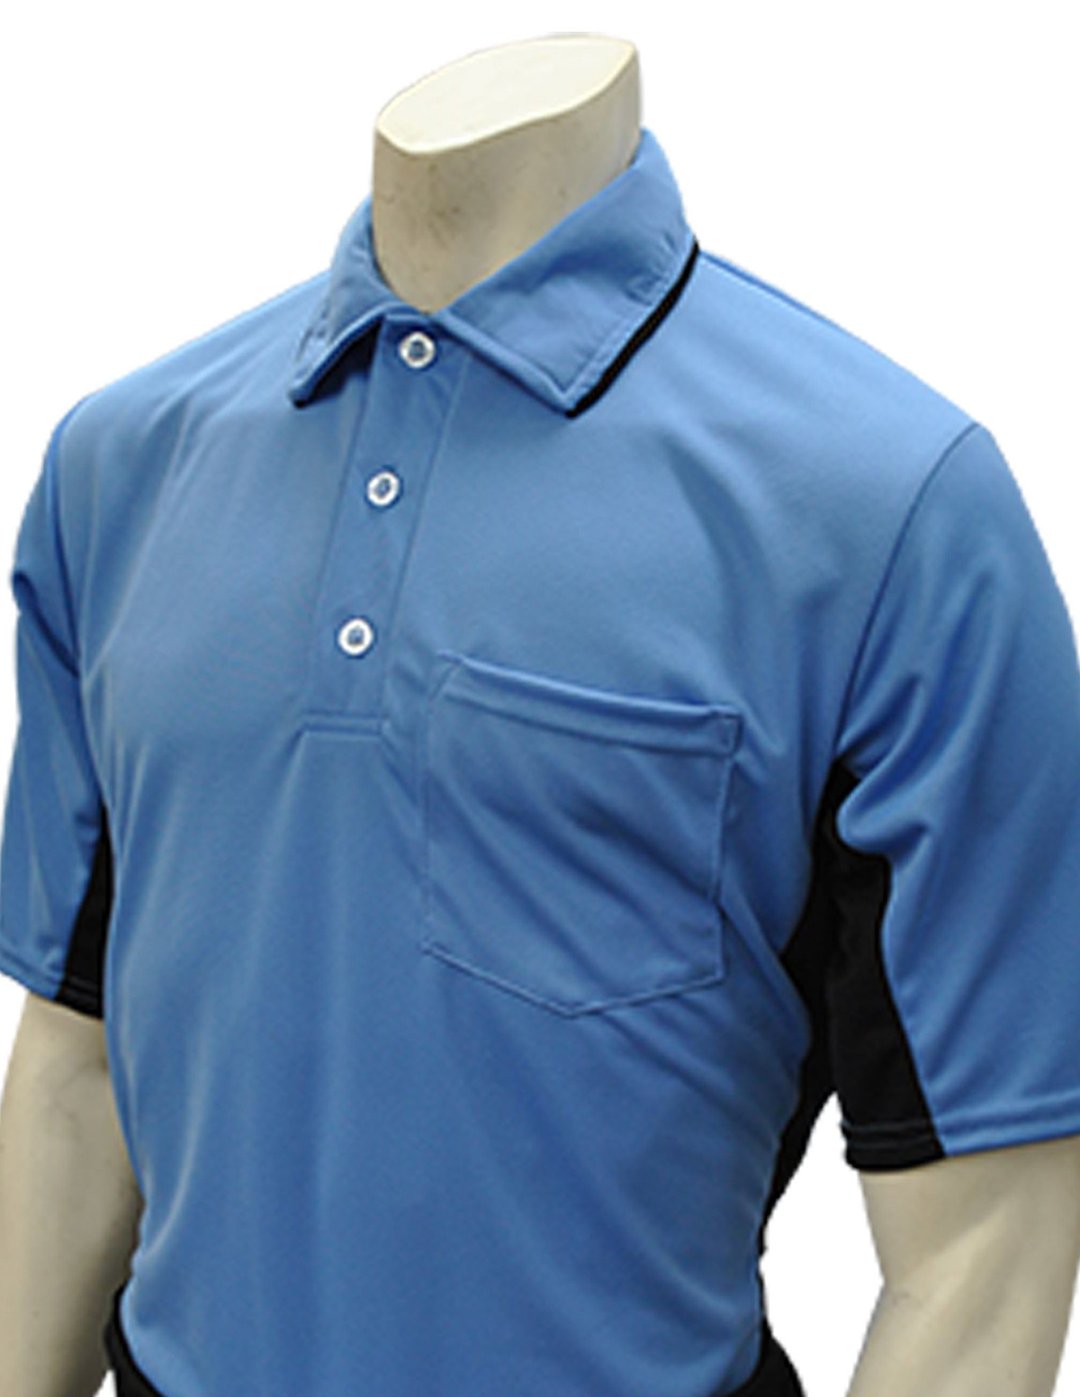 USA-312 - Smitty "Made in USA" - "Major League" Style Umpire Shirt - Performance Mesh Fabric